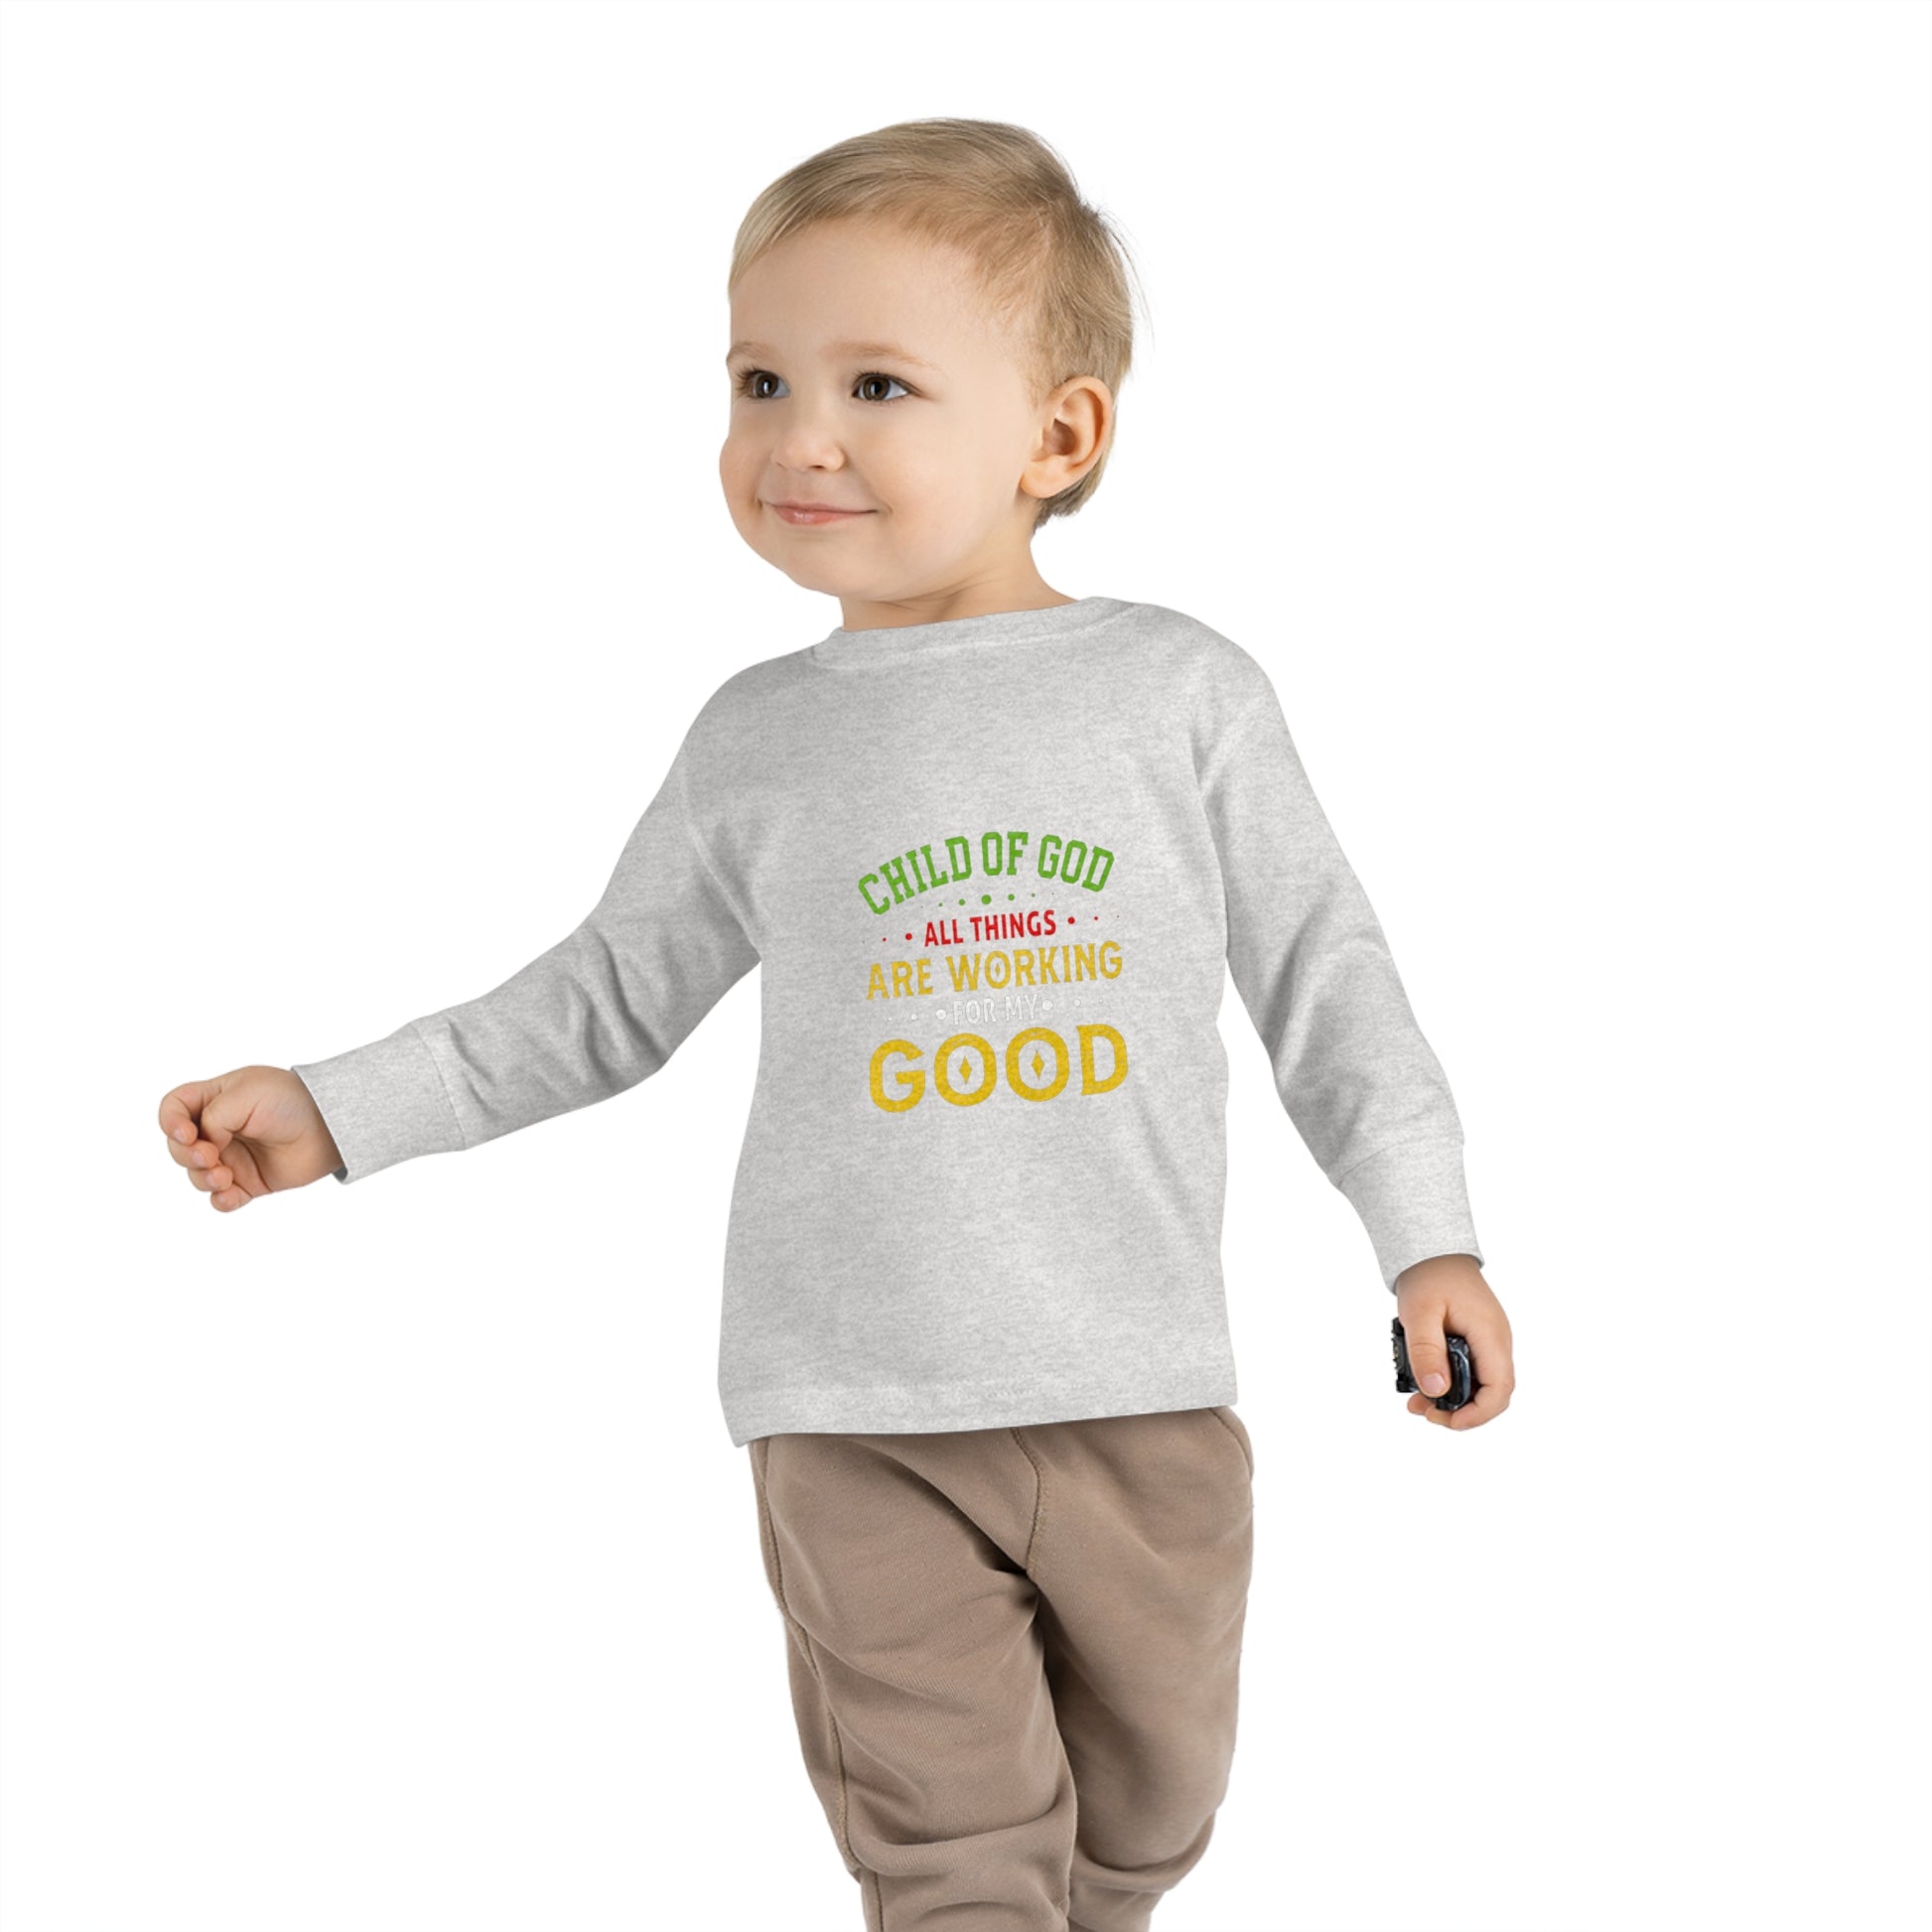 Child Of God All Things Are Working For My Good  Toddler Christian Sweatshirt Printify